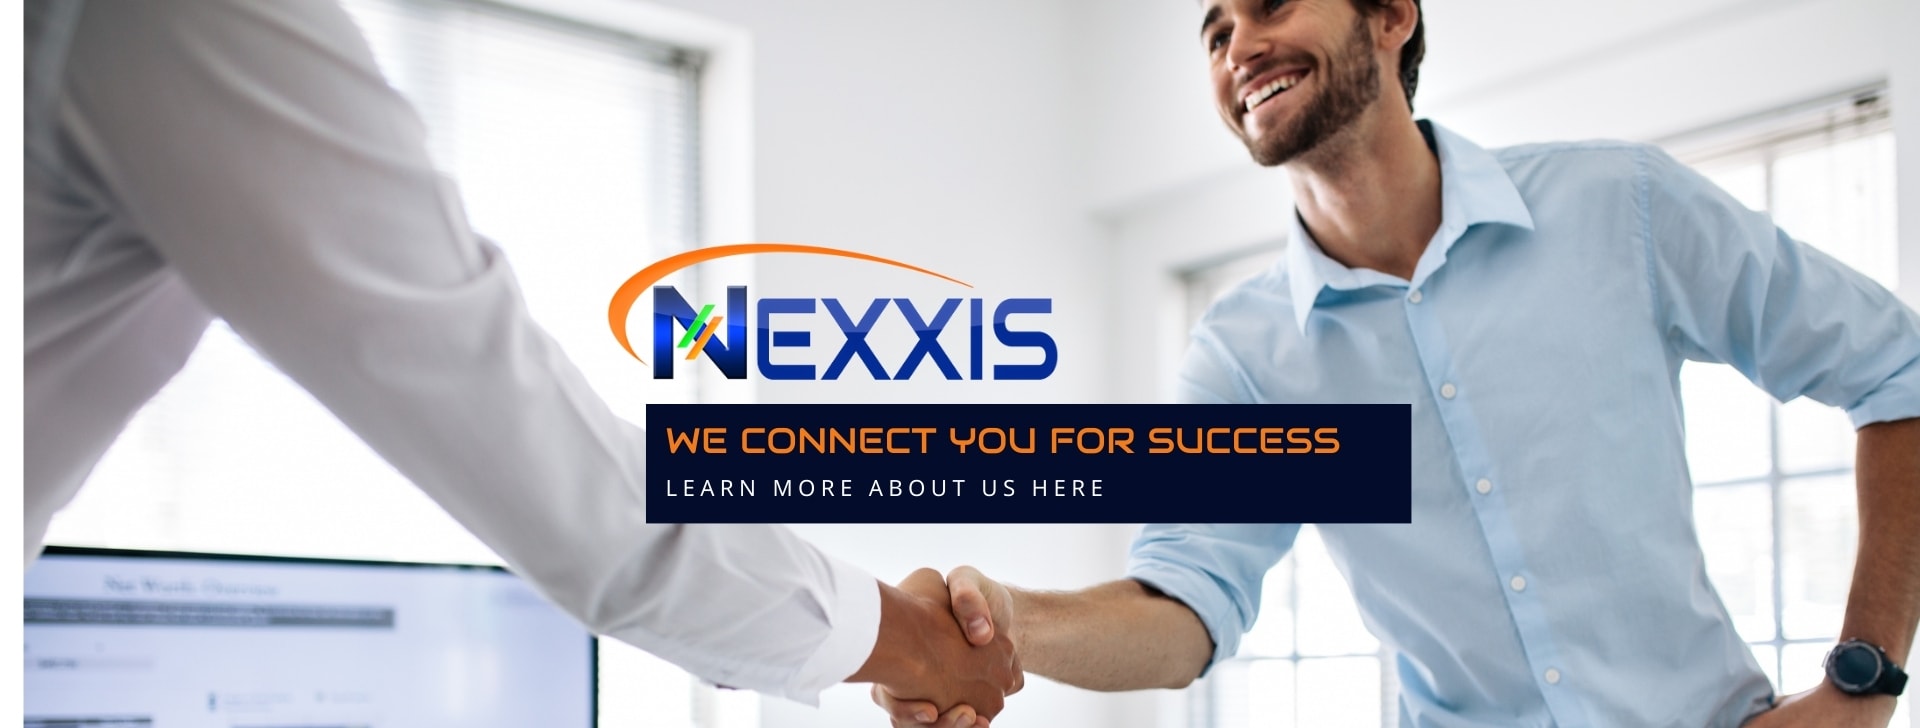 About NEXXIS